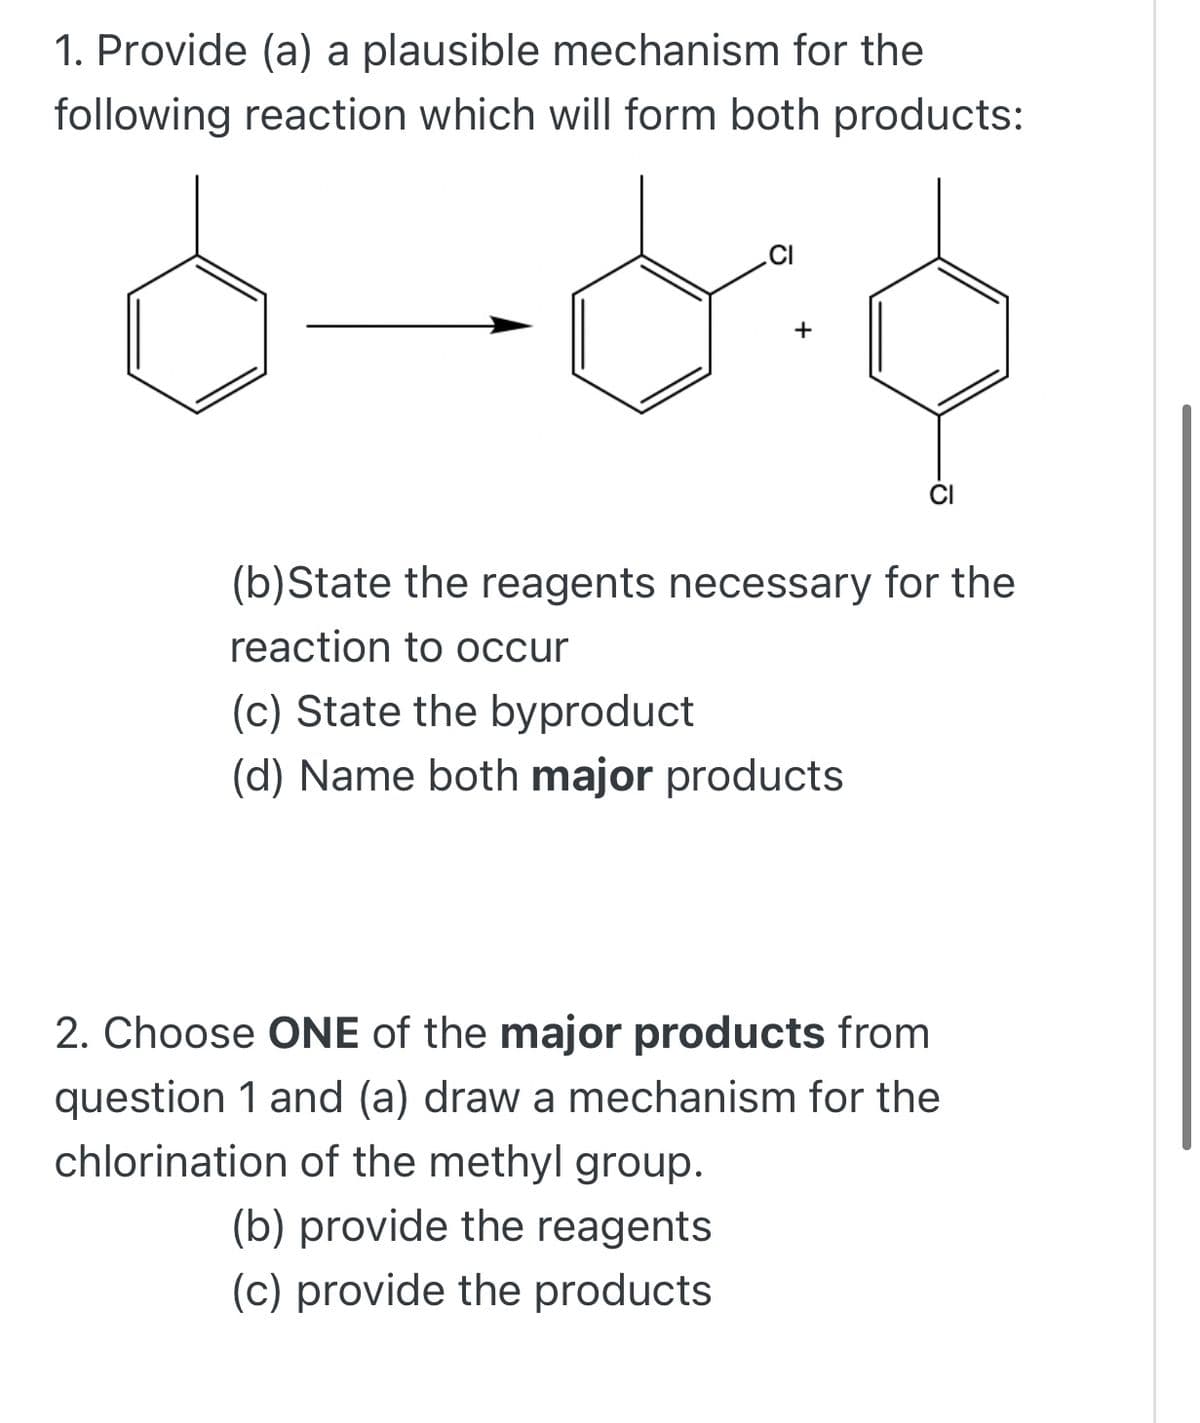 1. Provide (a) a plausible mechanism for the
following reaction which will form both products:
.CI
+
(b)State the reagents necessary for the
reaction to occur
(c) State the byproduct
(d) Name both major products
2. Choose ONE of the major products from
question 1 and (a) draw a mechanism for the
chlorination of the methyl group.
(b) provide the reagents
(c) provide the products
